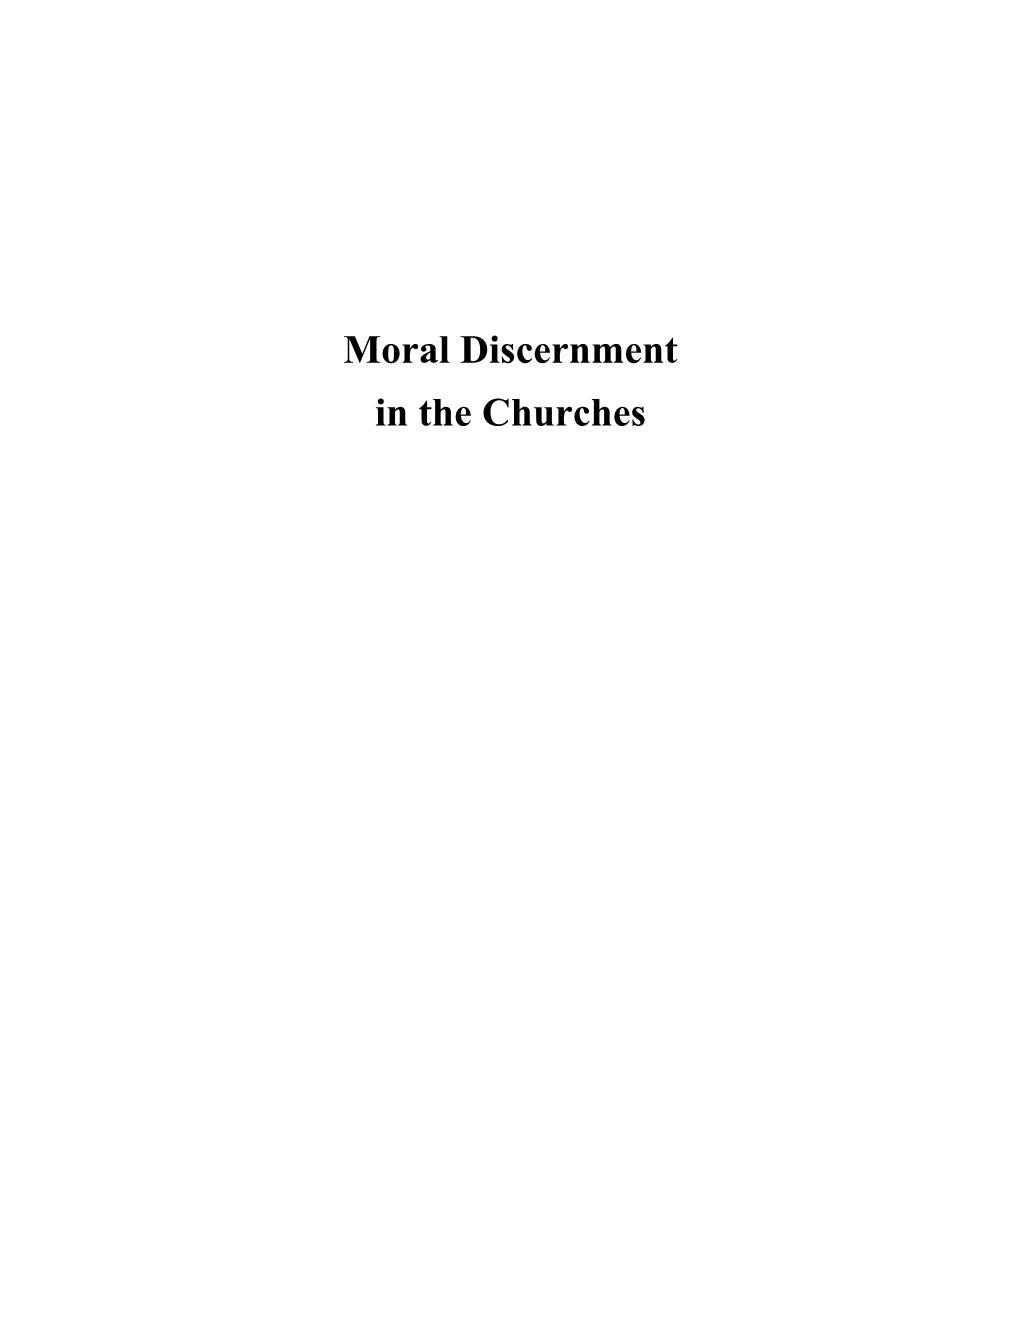 Moral Discernment in the Churches